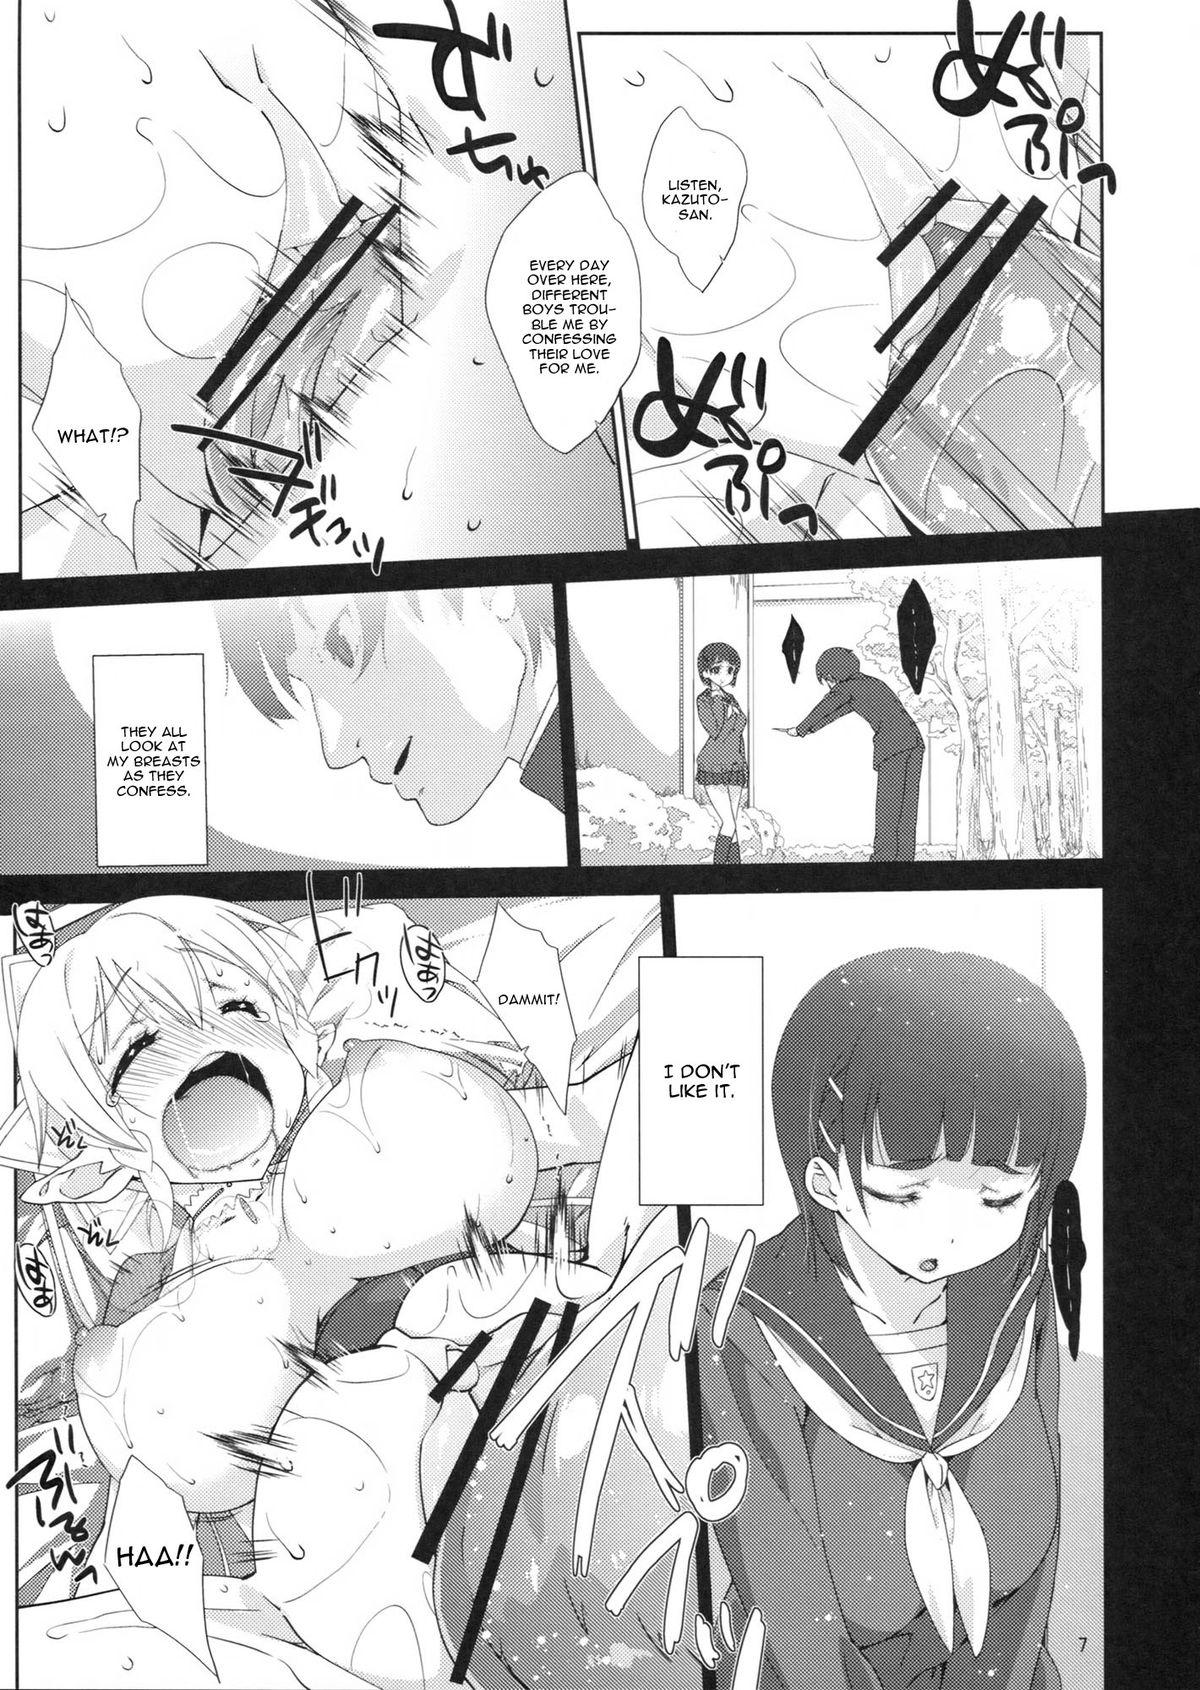 4some Suguha Route. - Sword art online Play - Page 6